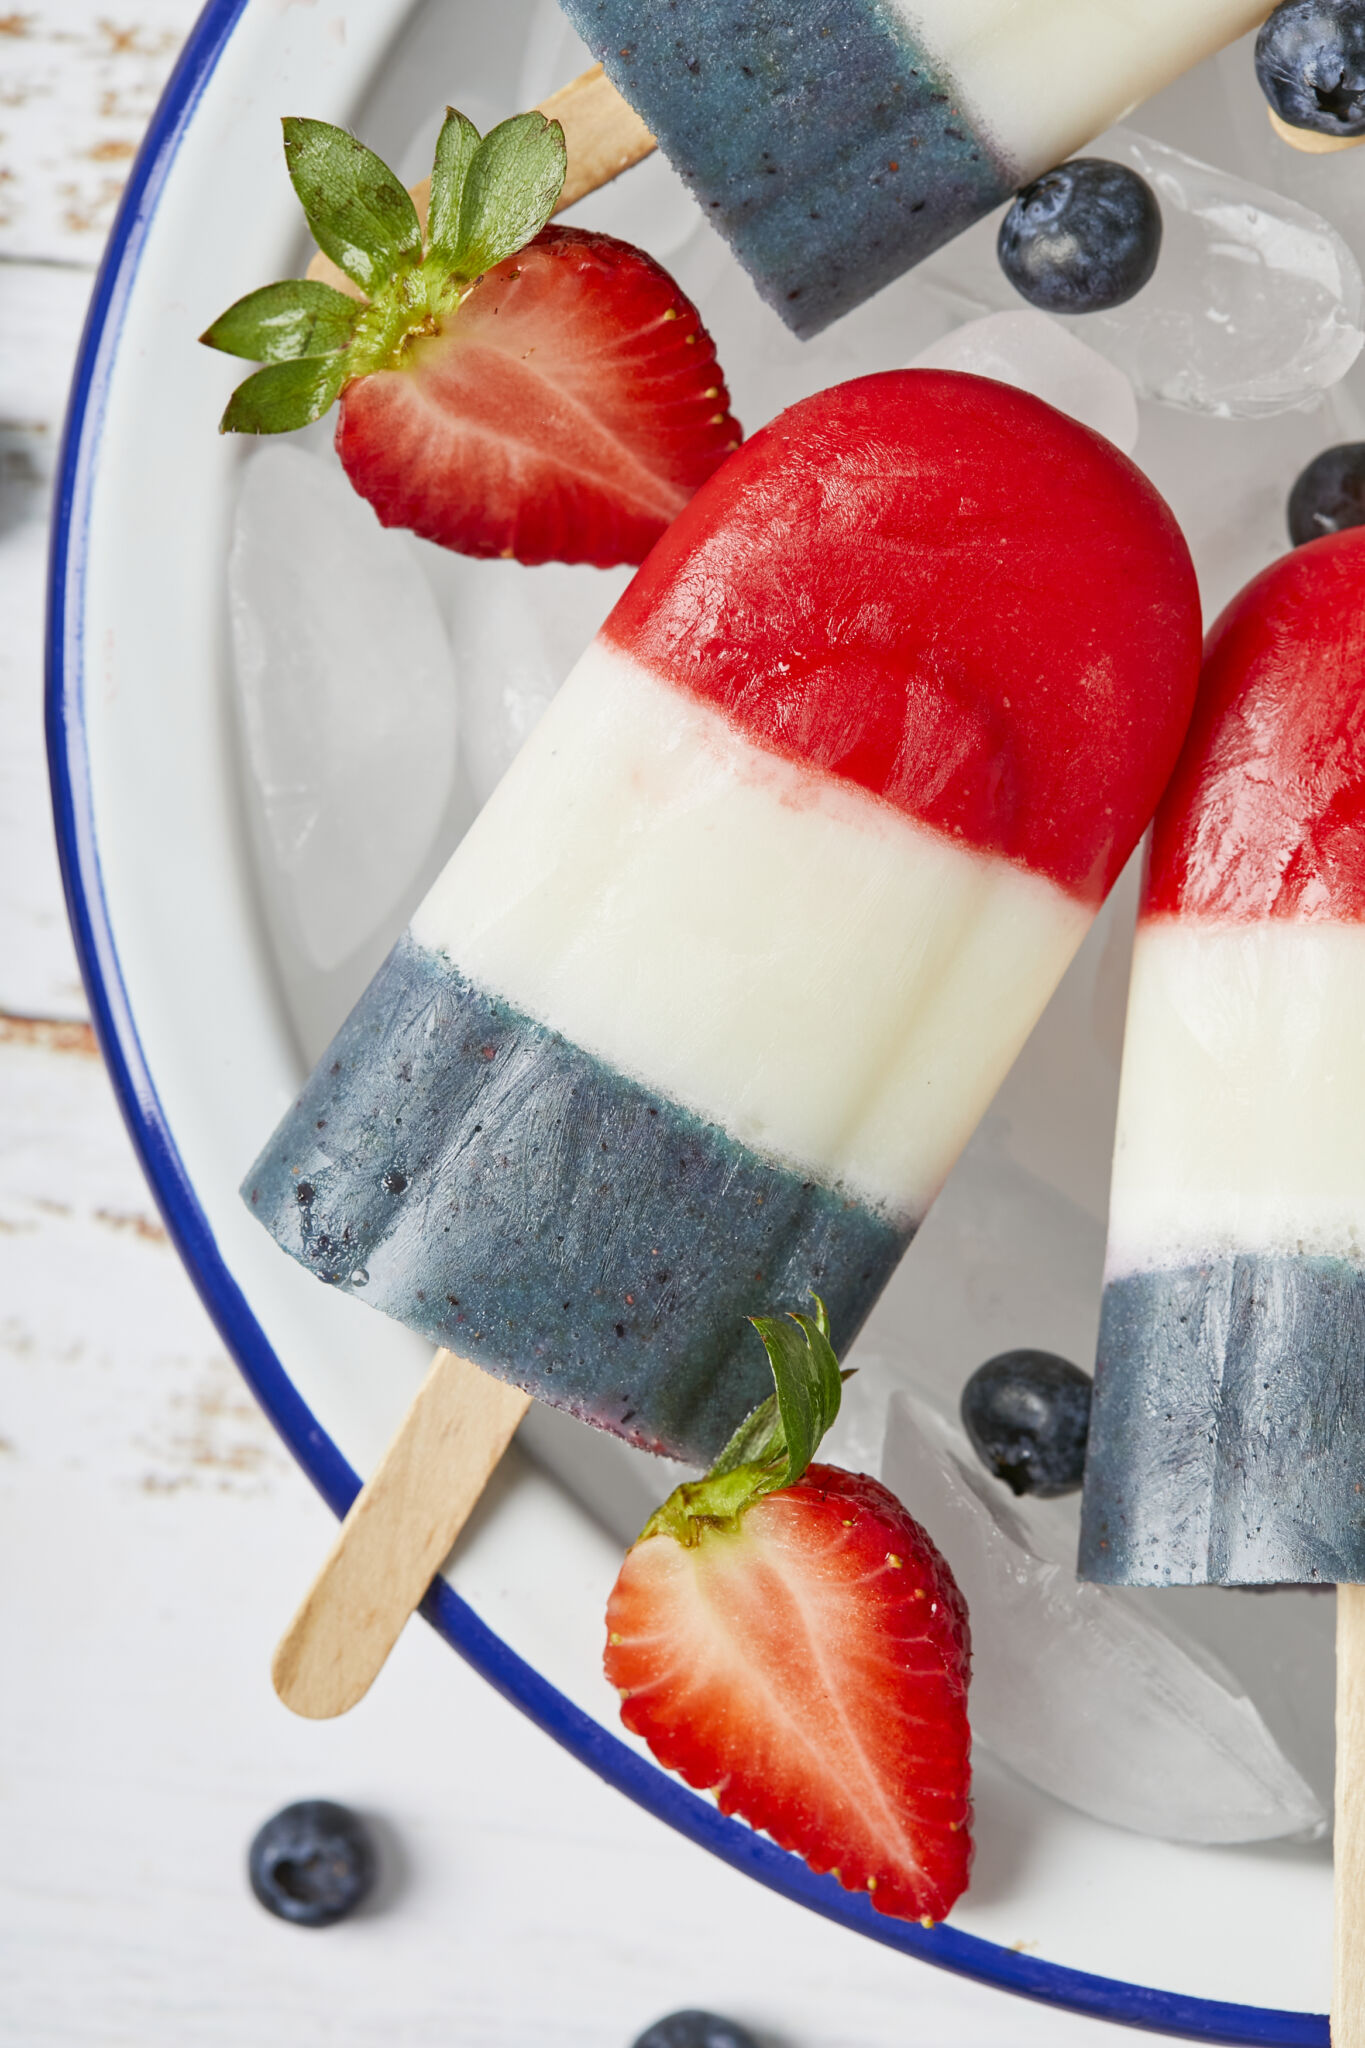 Bomb pops are served on half of the platter with ice and fresh blueberries and strawberries. 